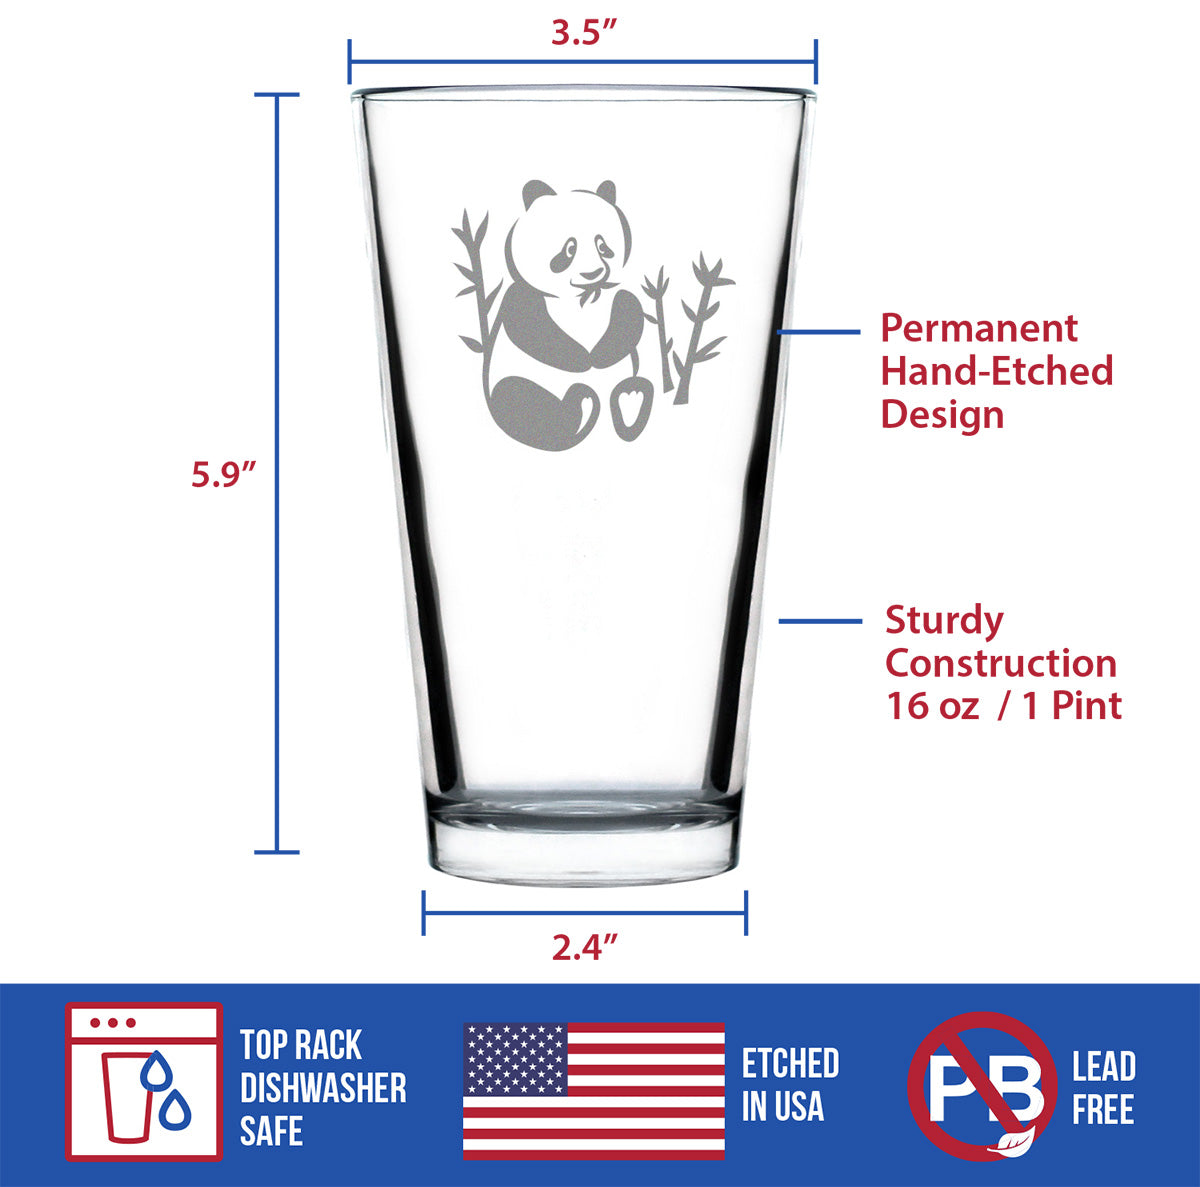 Panda Pint Glass for Beer - Unique Panda Themed Decor and Gifts for Panda Bears - 16 Oz Glasses